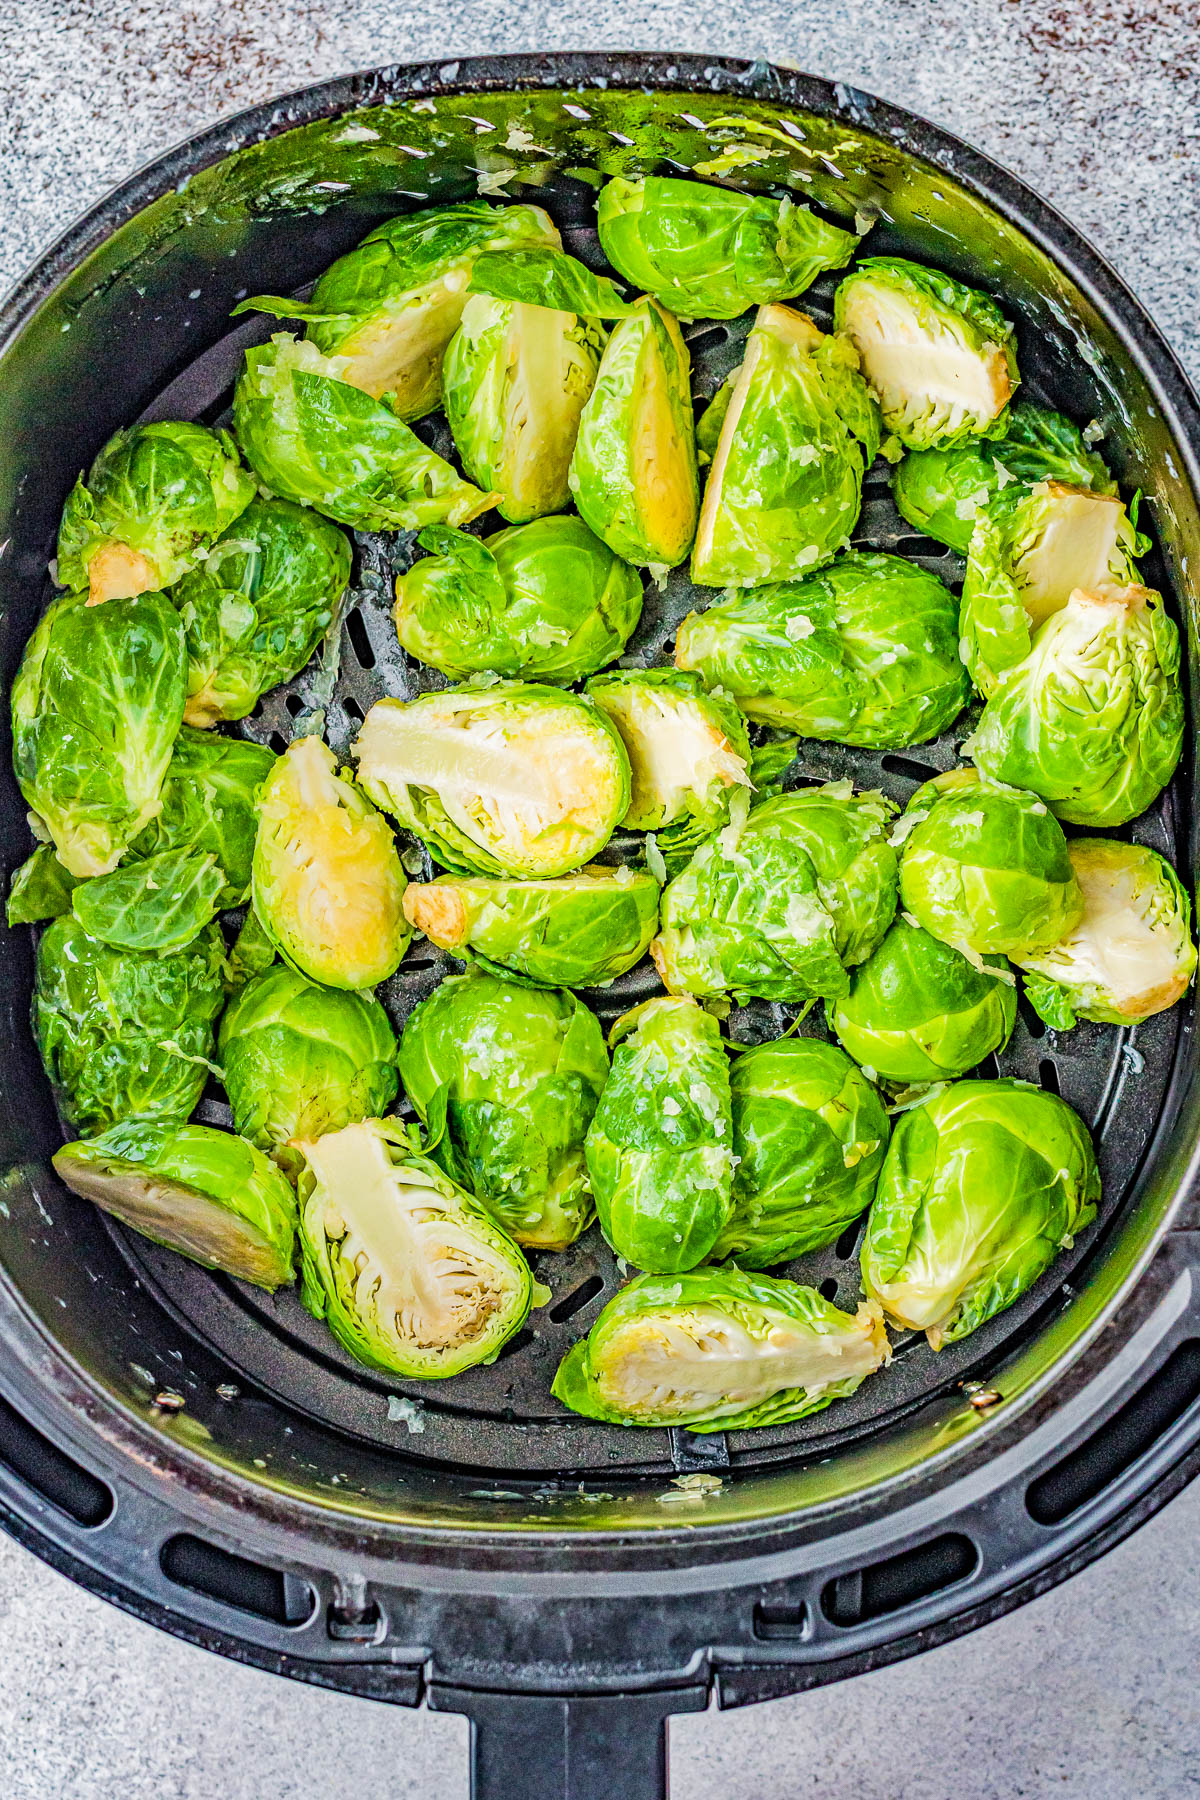 Air Fryer Brussels Sprouts with Sweet and Spicy Glaze - The air fryer makes these Brussels sprouts perfectly crispy on the outside, tender on the inside, and the mildly spicy honey butter glaze makes them IRRESISTIBLE! An EASY side dish for busy weeknights, family dinners, or Thanksgiving that's ready FAST!